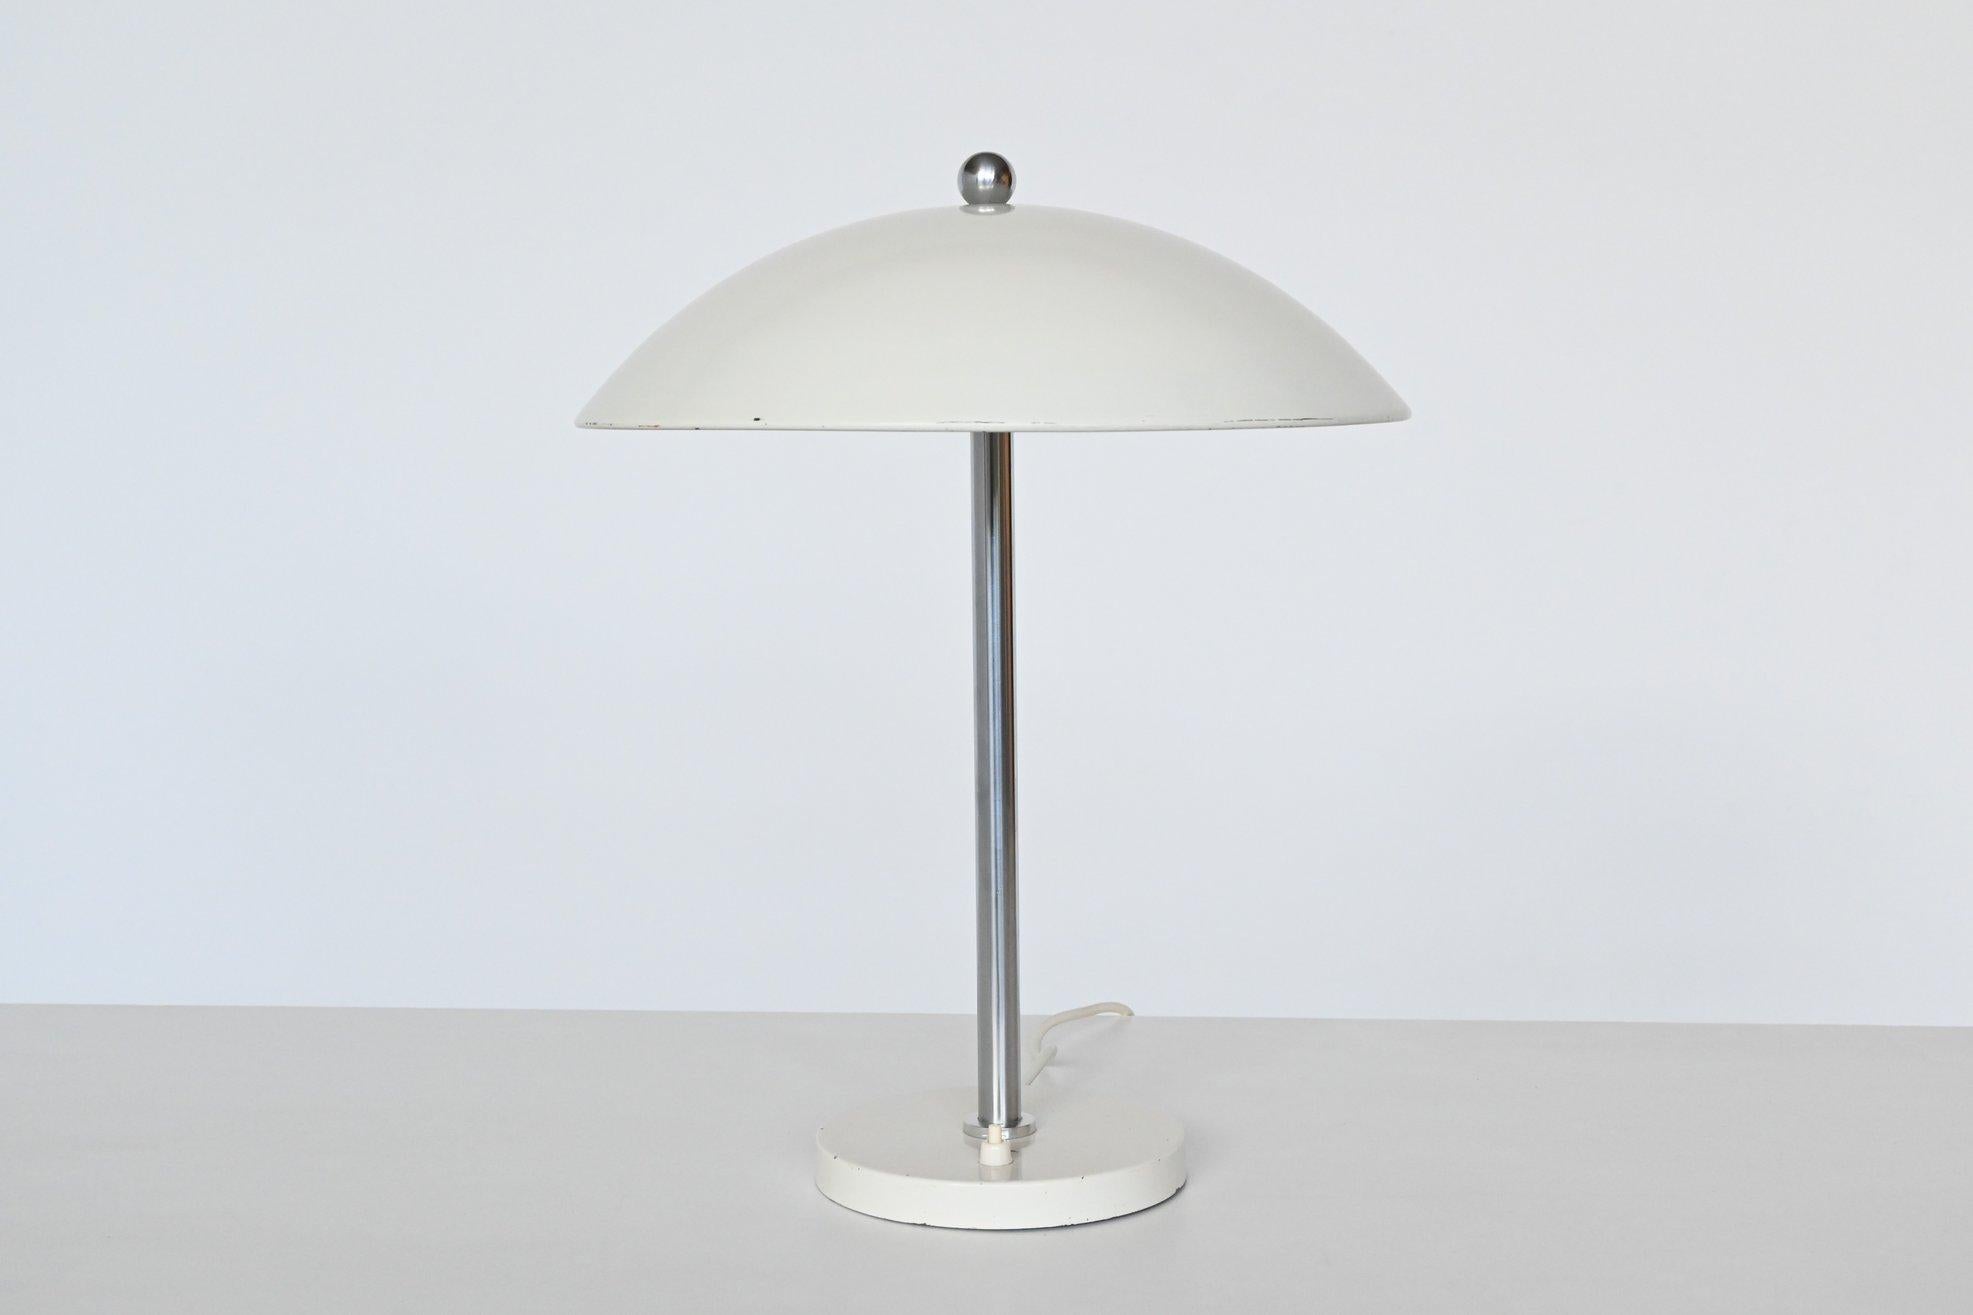 Very nice mushroom shaped white table or desk lamp model 5015 designed by W.H. Gispen and manufactured by Gispen Culemborg, The Netherlands 1950. This lamp has a white lacquered round weighted base with a brushed steel bar and an original white